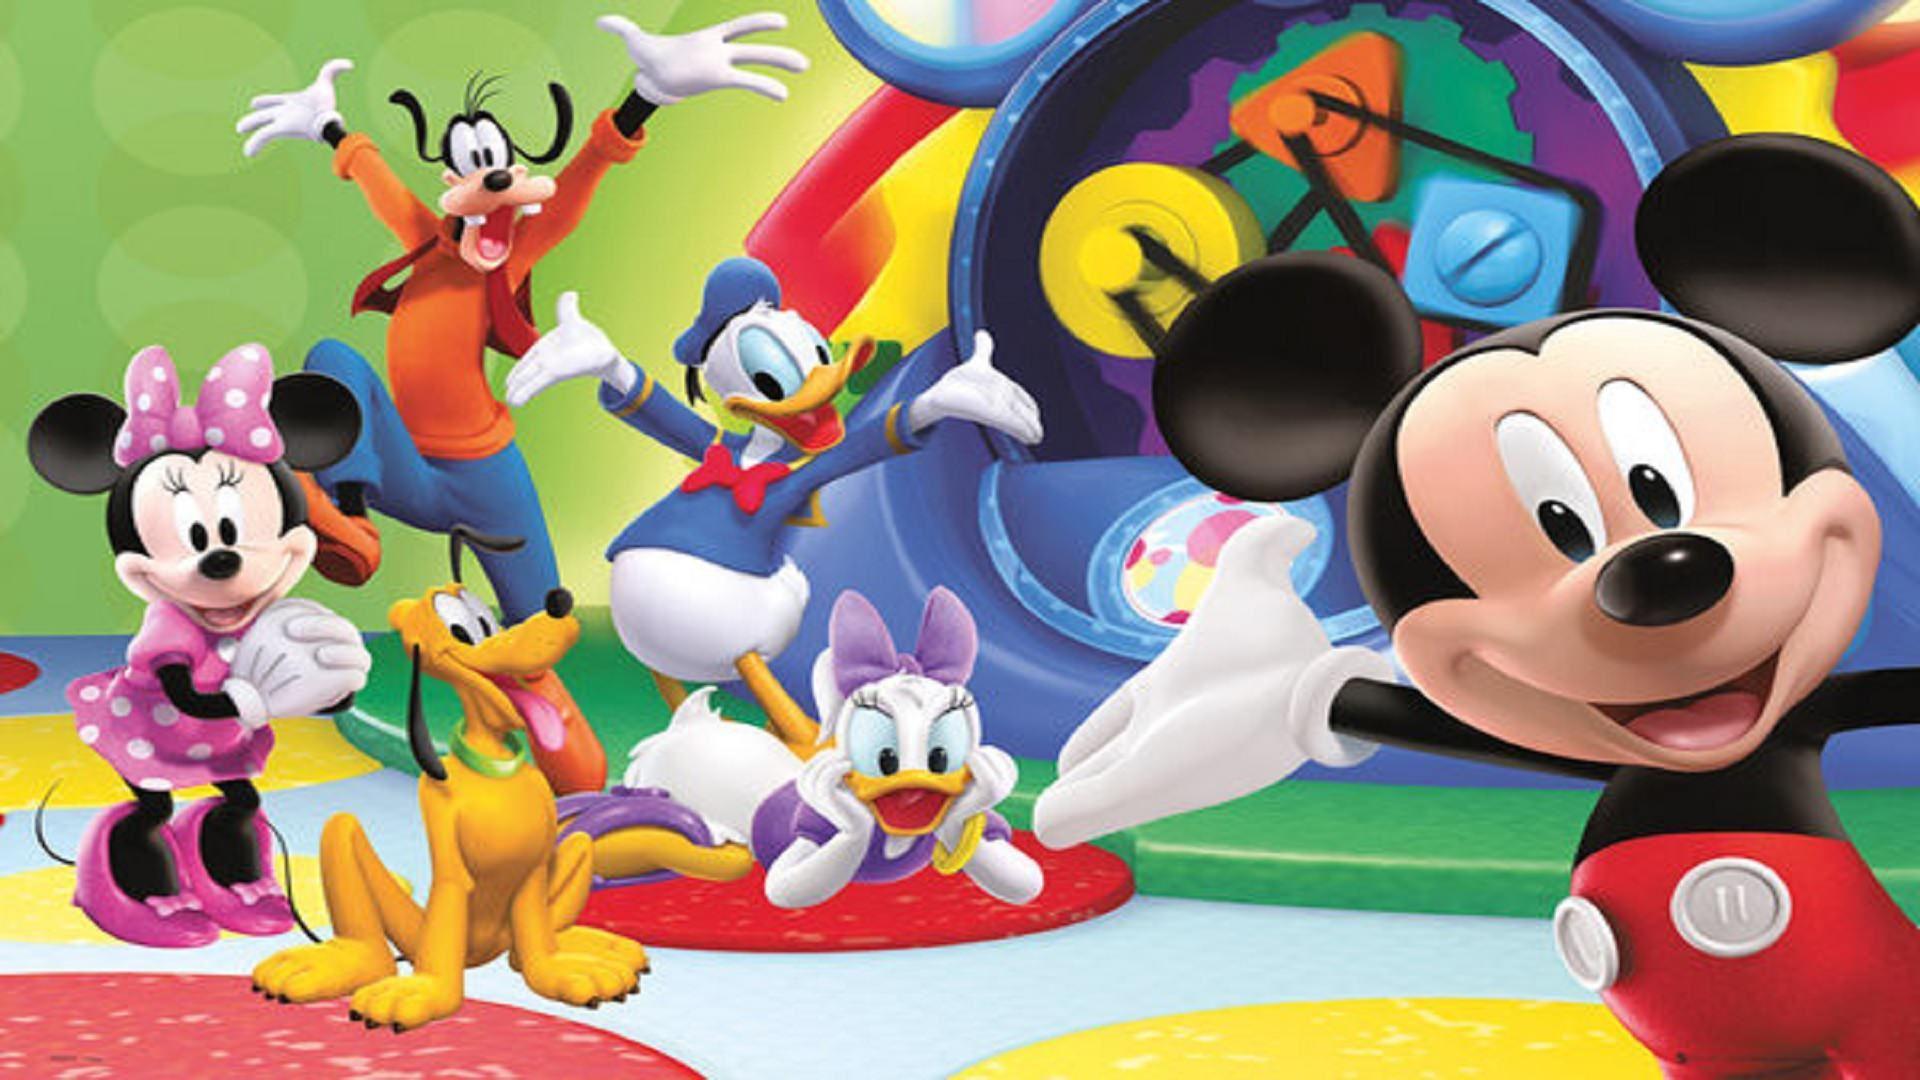 Free Wallpaper background mickey mouse clubhouse for your devices ...